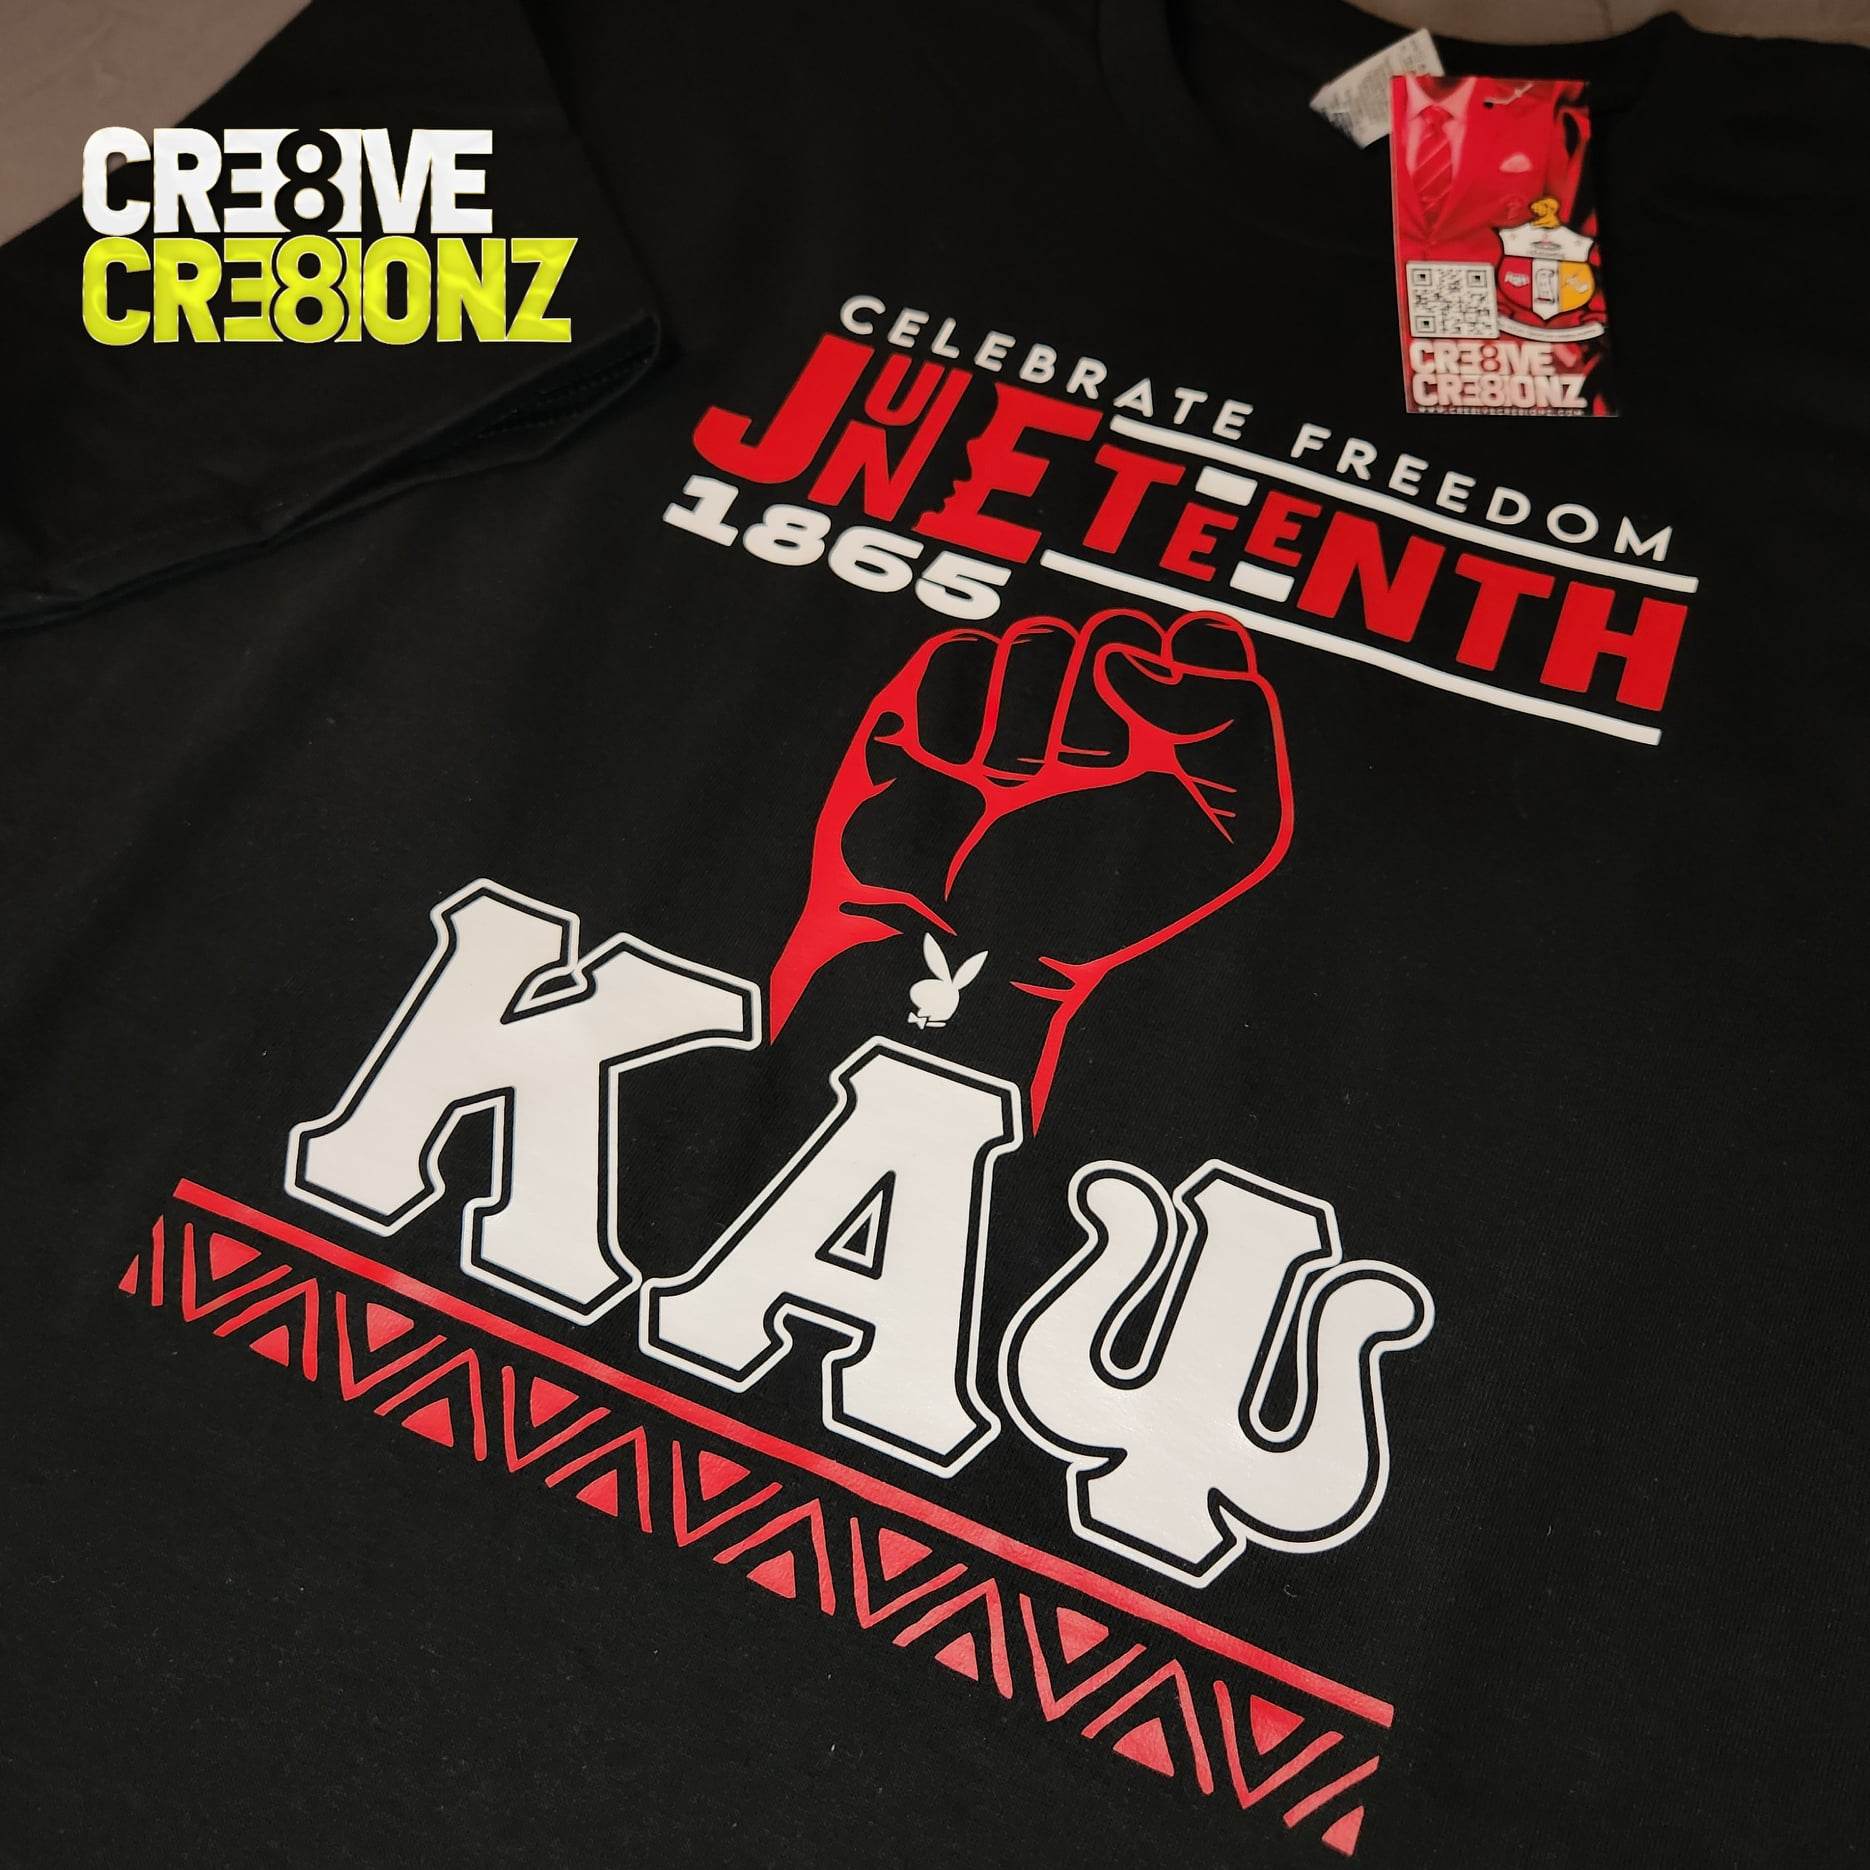 Juneteenth Kappa Shirt - Cre8ive Cre8ionz